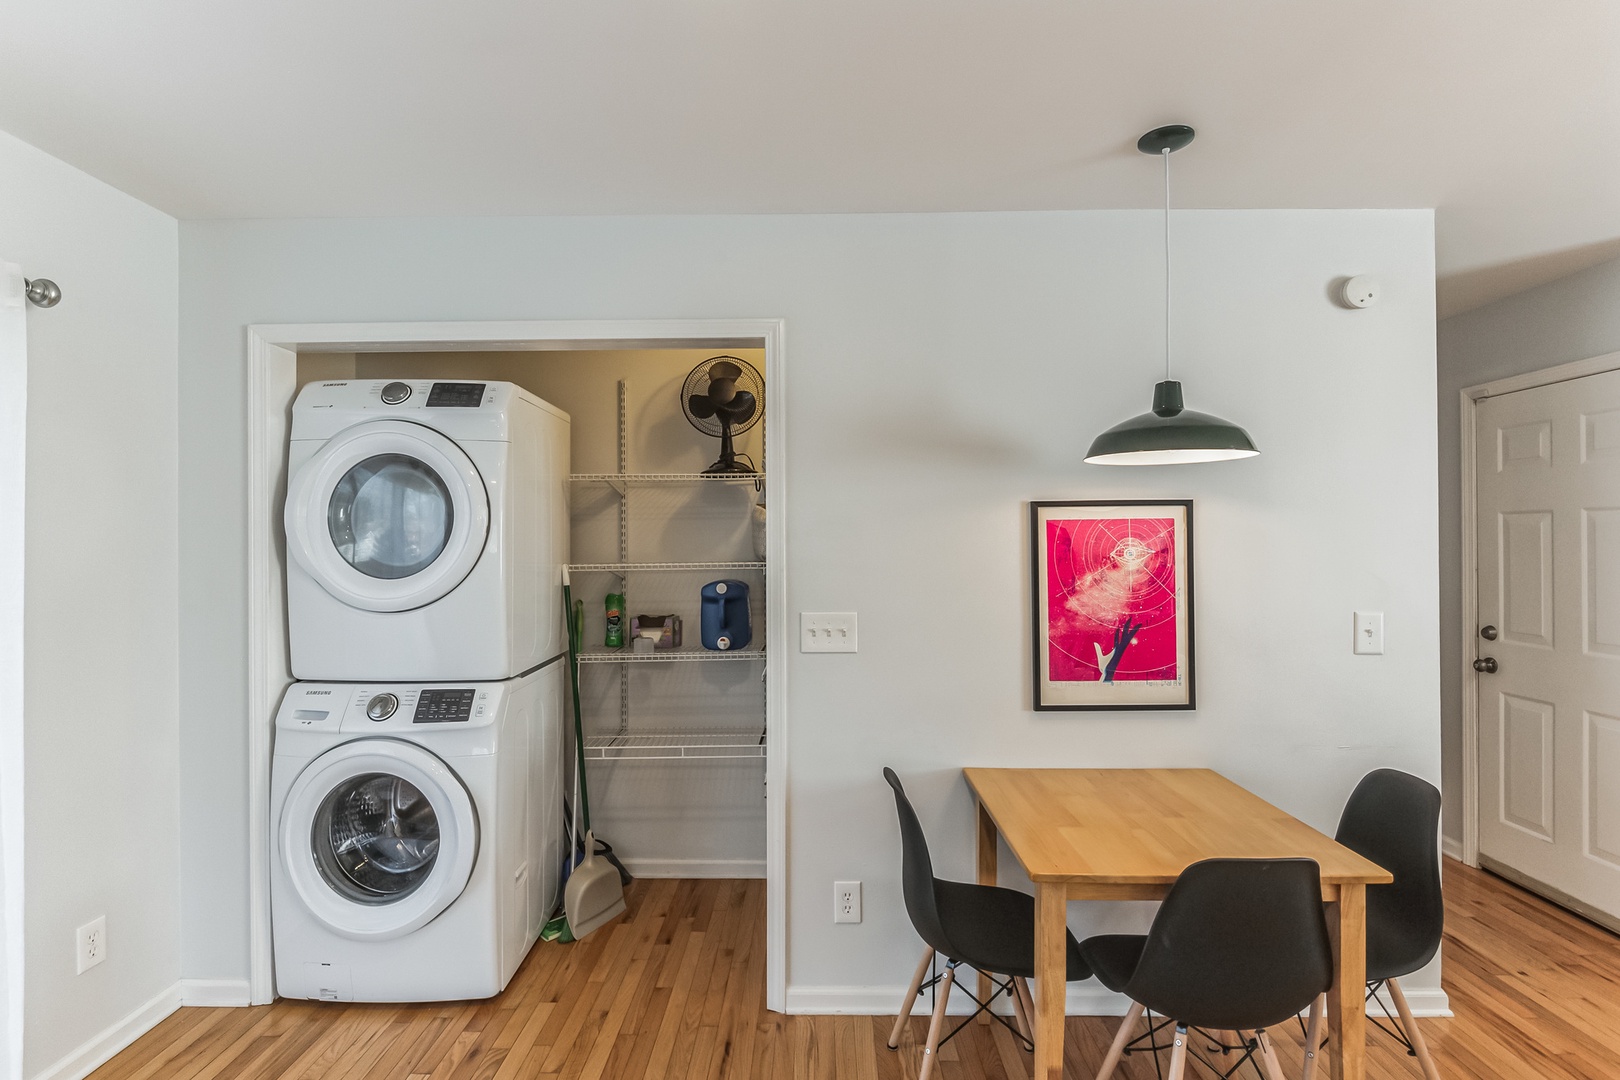 Private laundry is available for your stay, tucked away in the kitchen closet